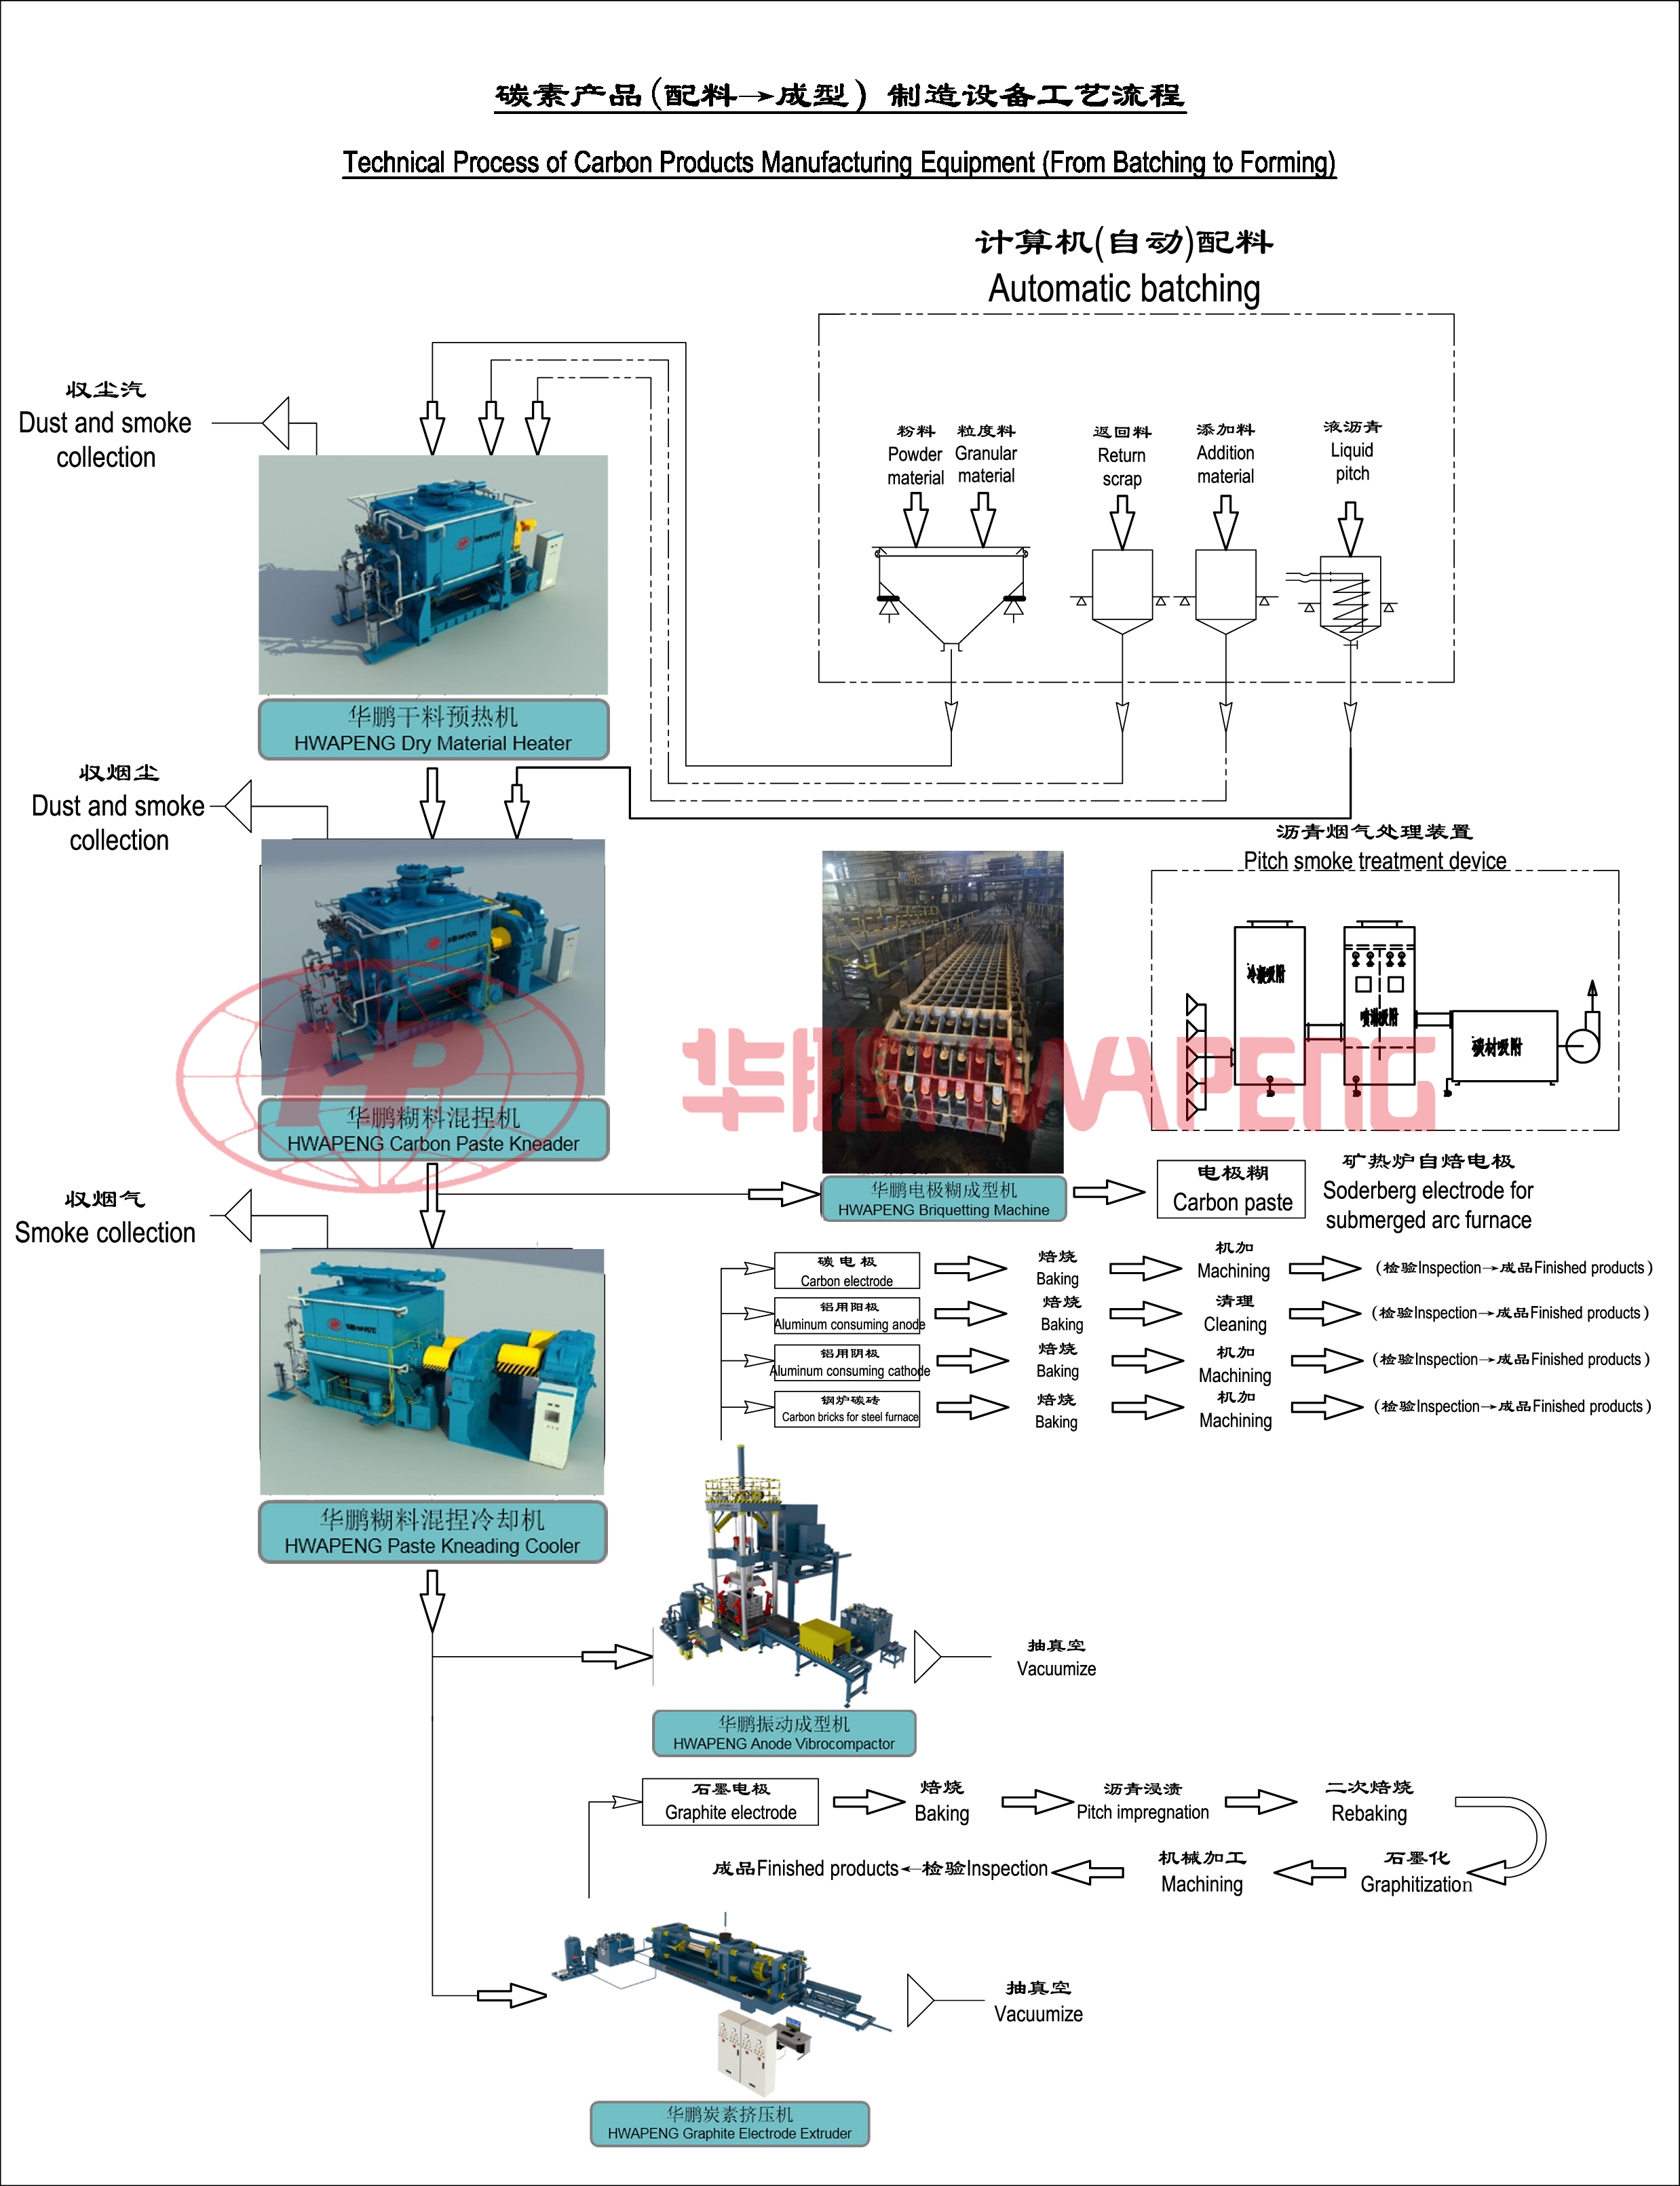 Technical Process of Carbon Products Manufacturing Equipment(From Batching to Forming)